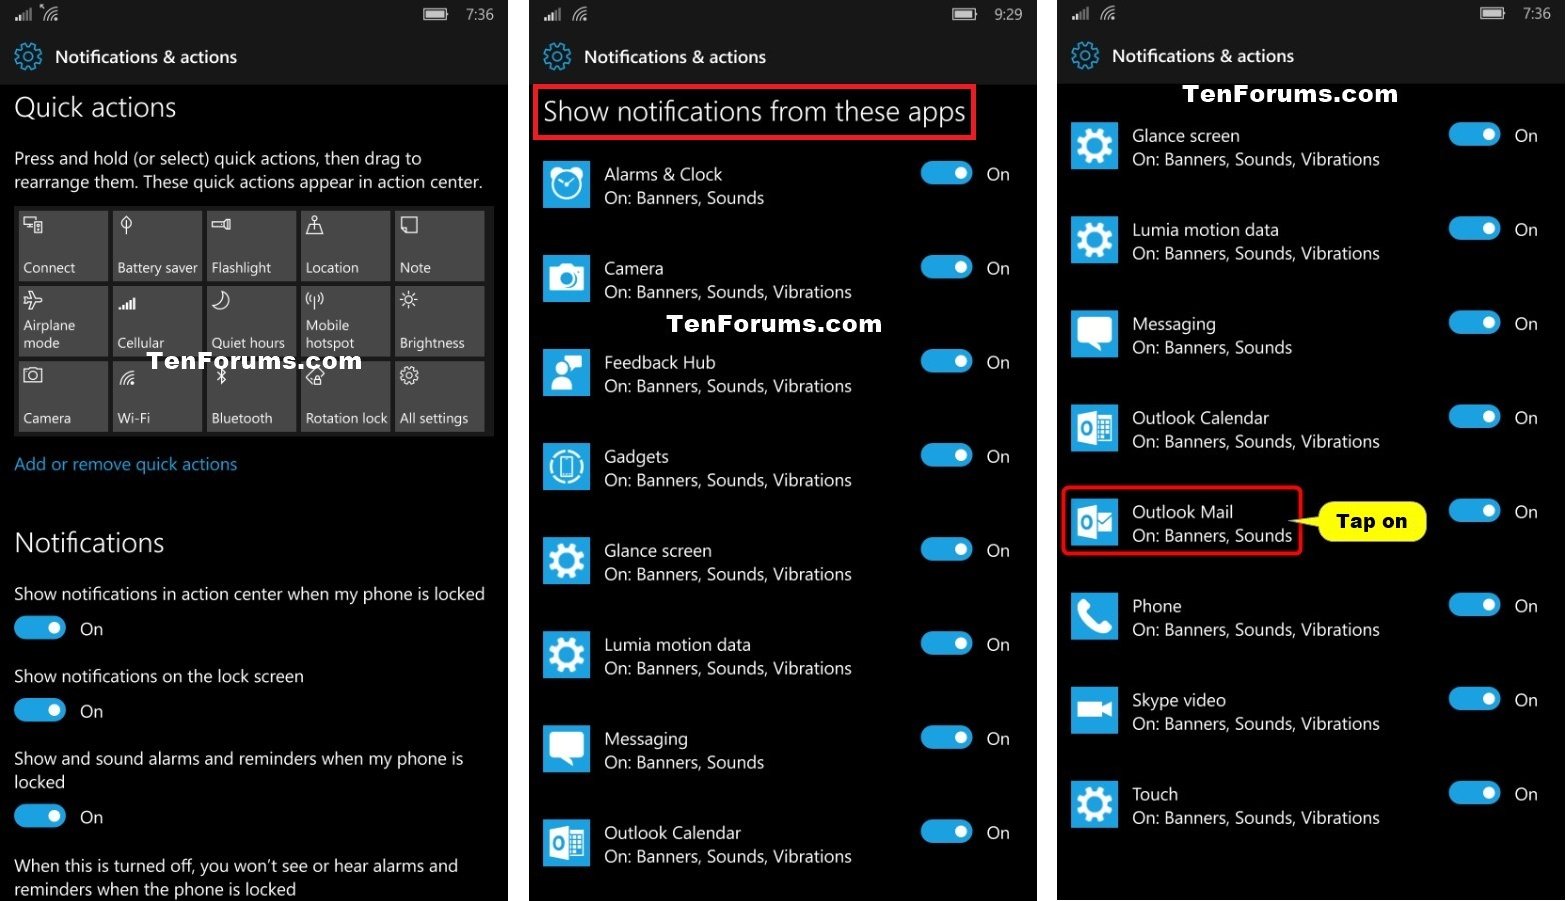 Action Center App Notifications Priority Change In Windows 10 Mobile